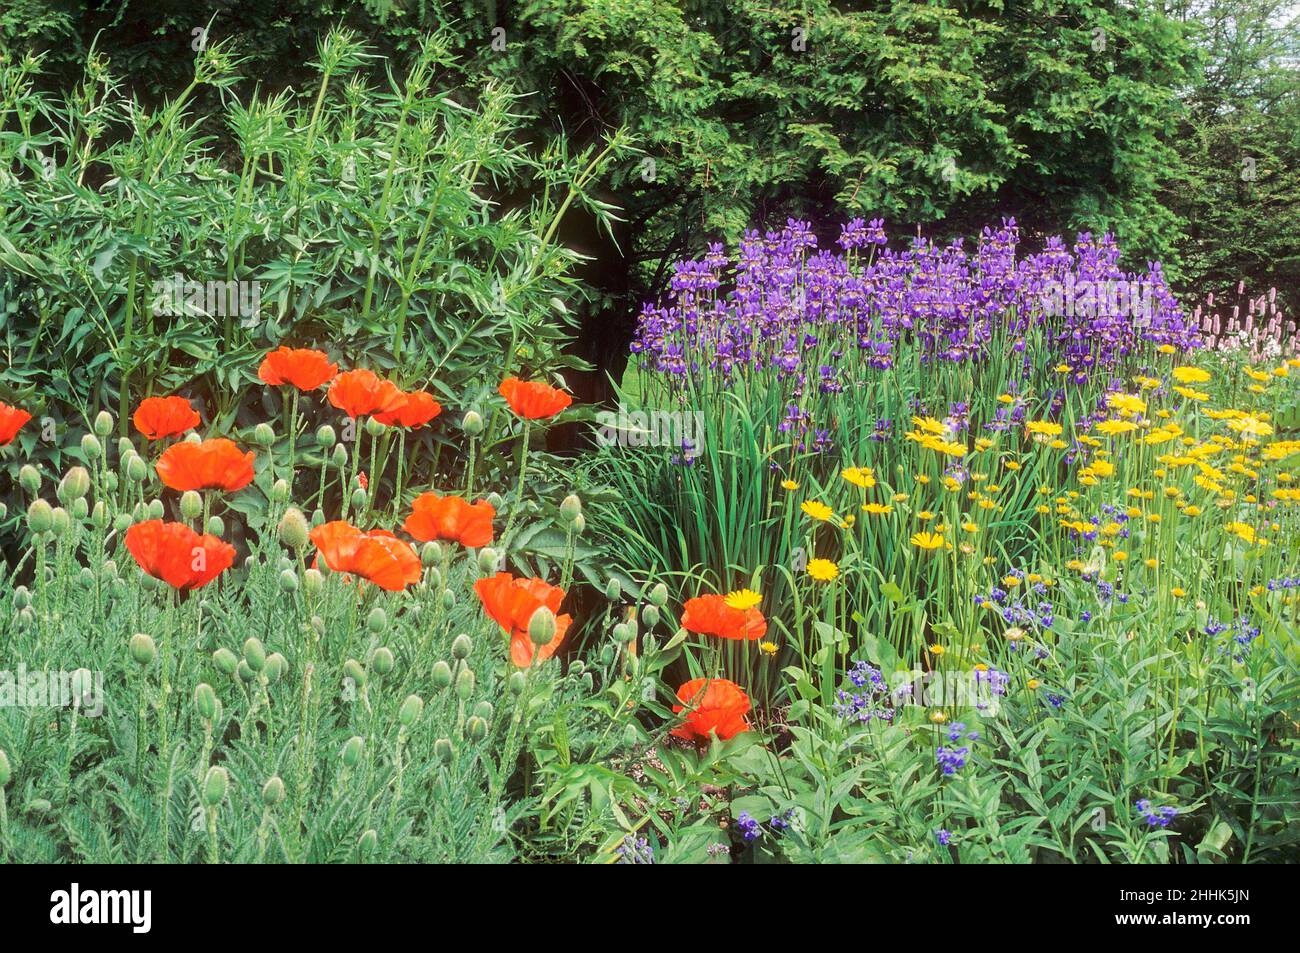 Groups of Iris Common Poppies and Doronicum in an herbaceous border in midsummer Stock Photo